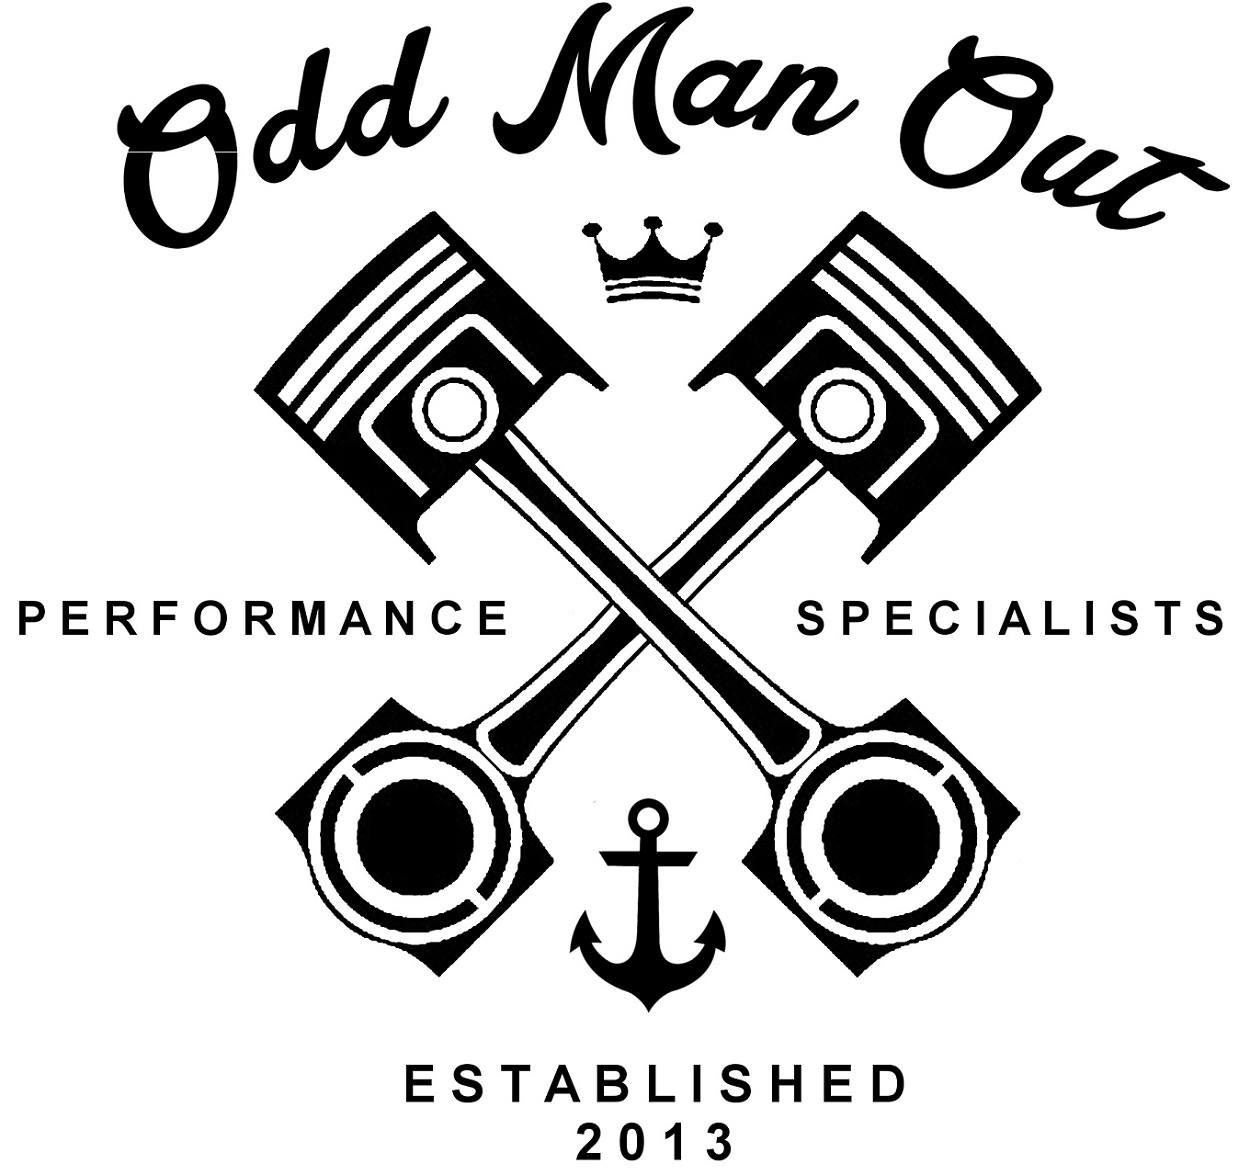 Odd Man Out Performance